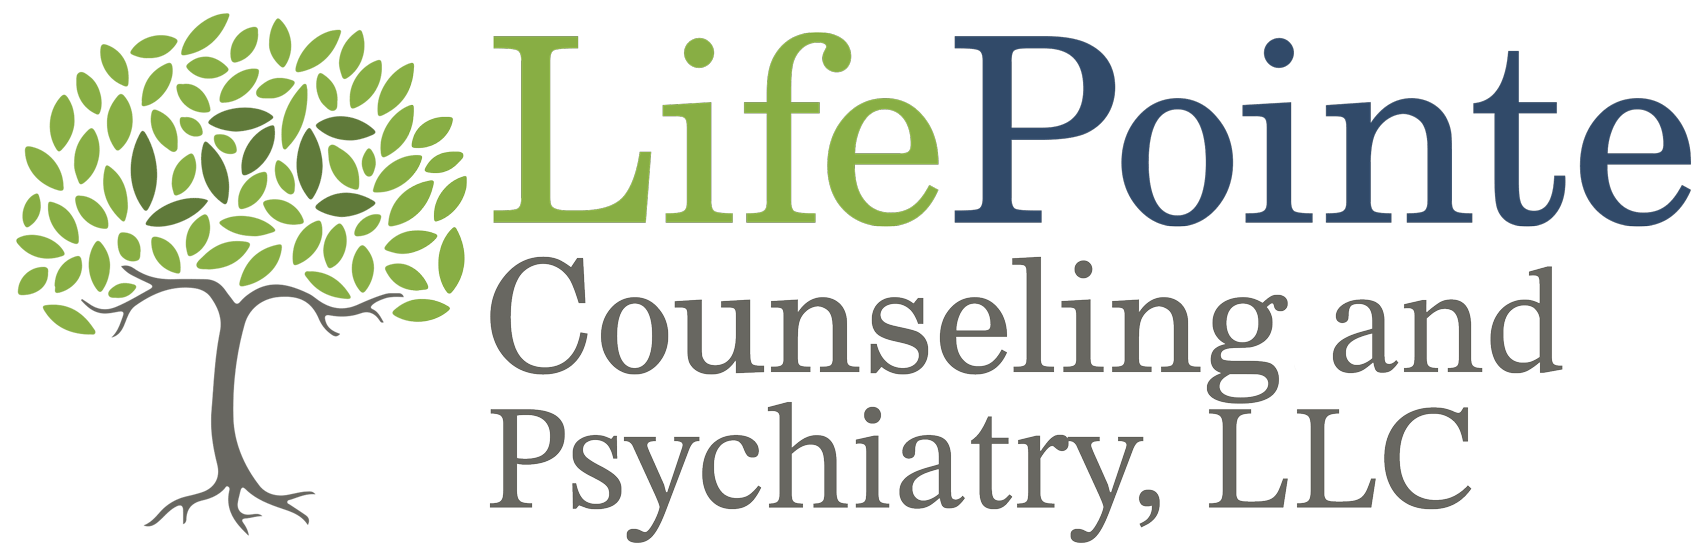 LifePointe Counseling, LLC